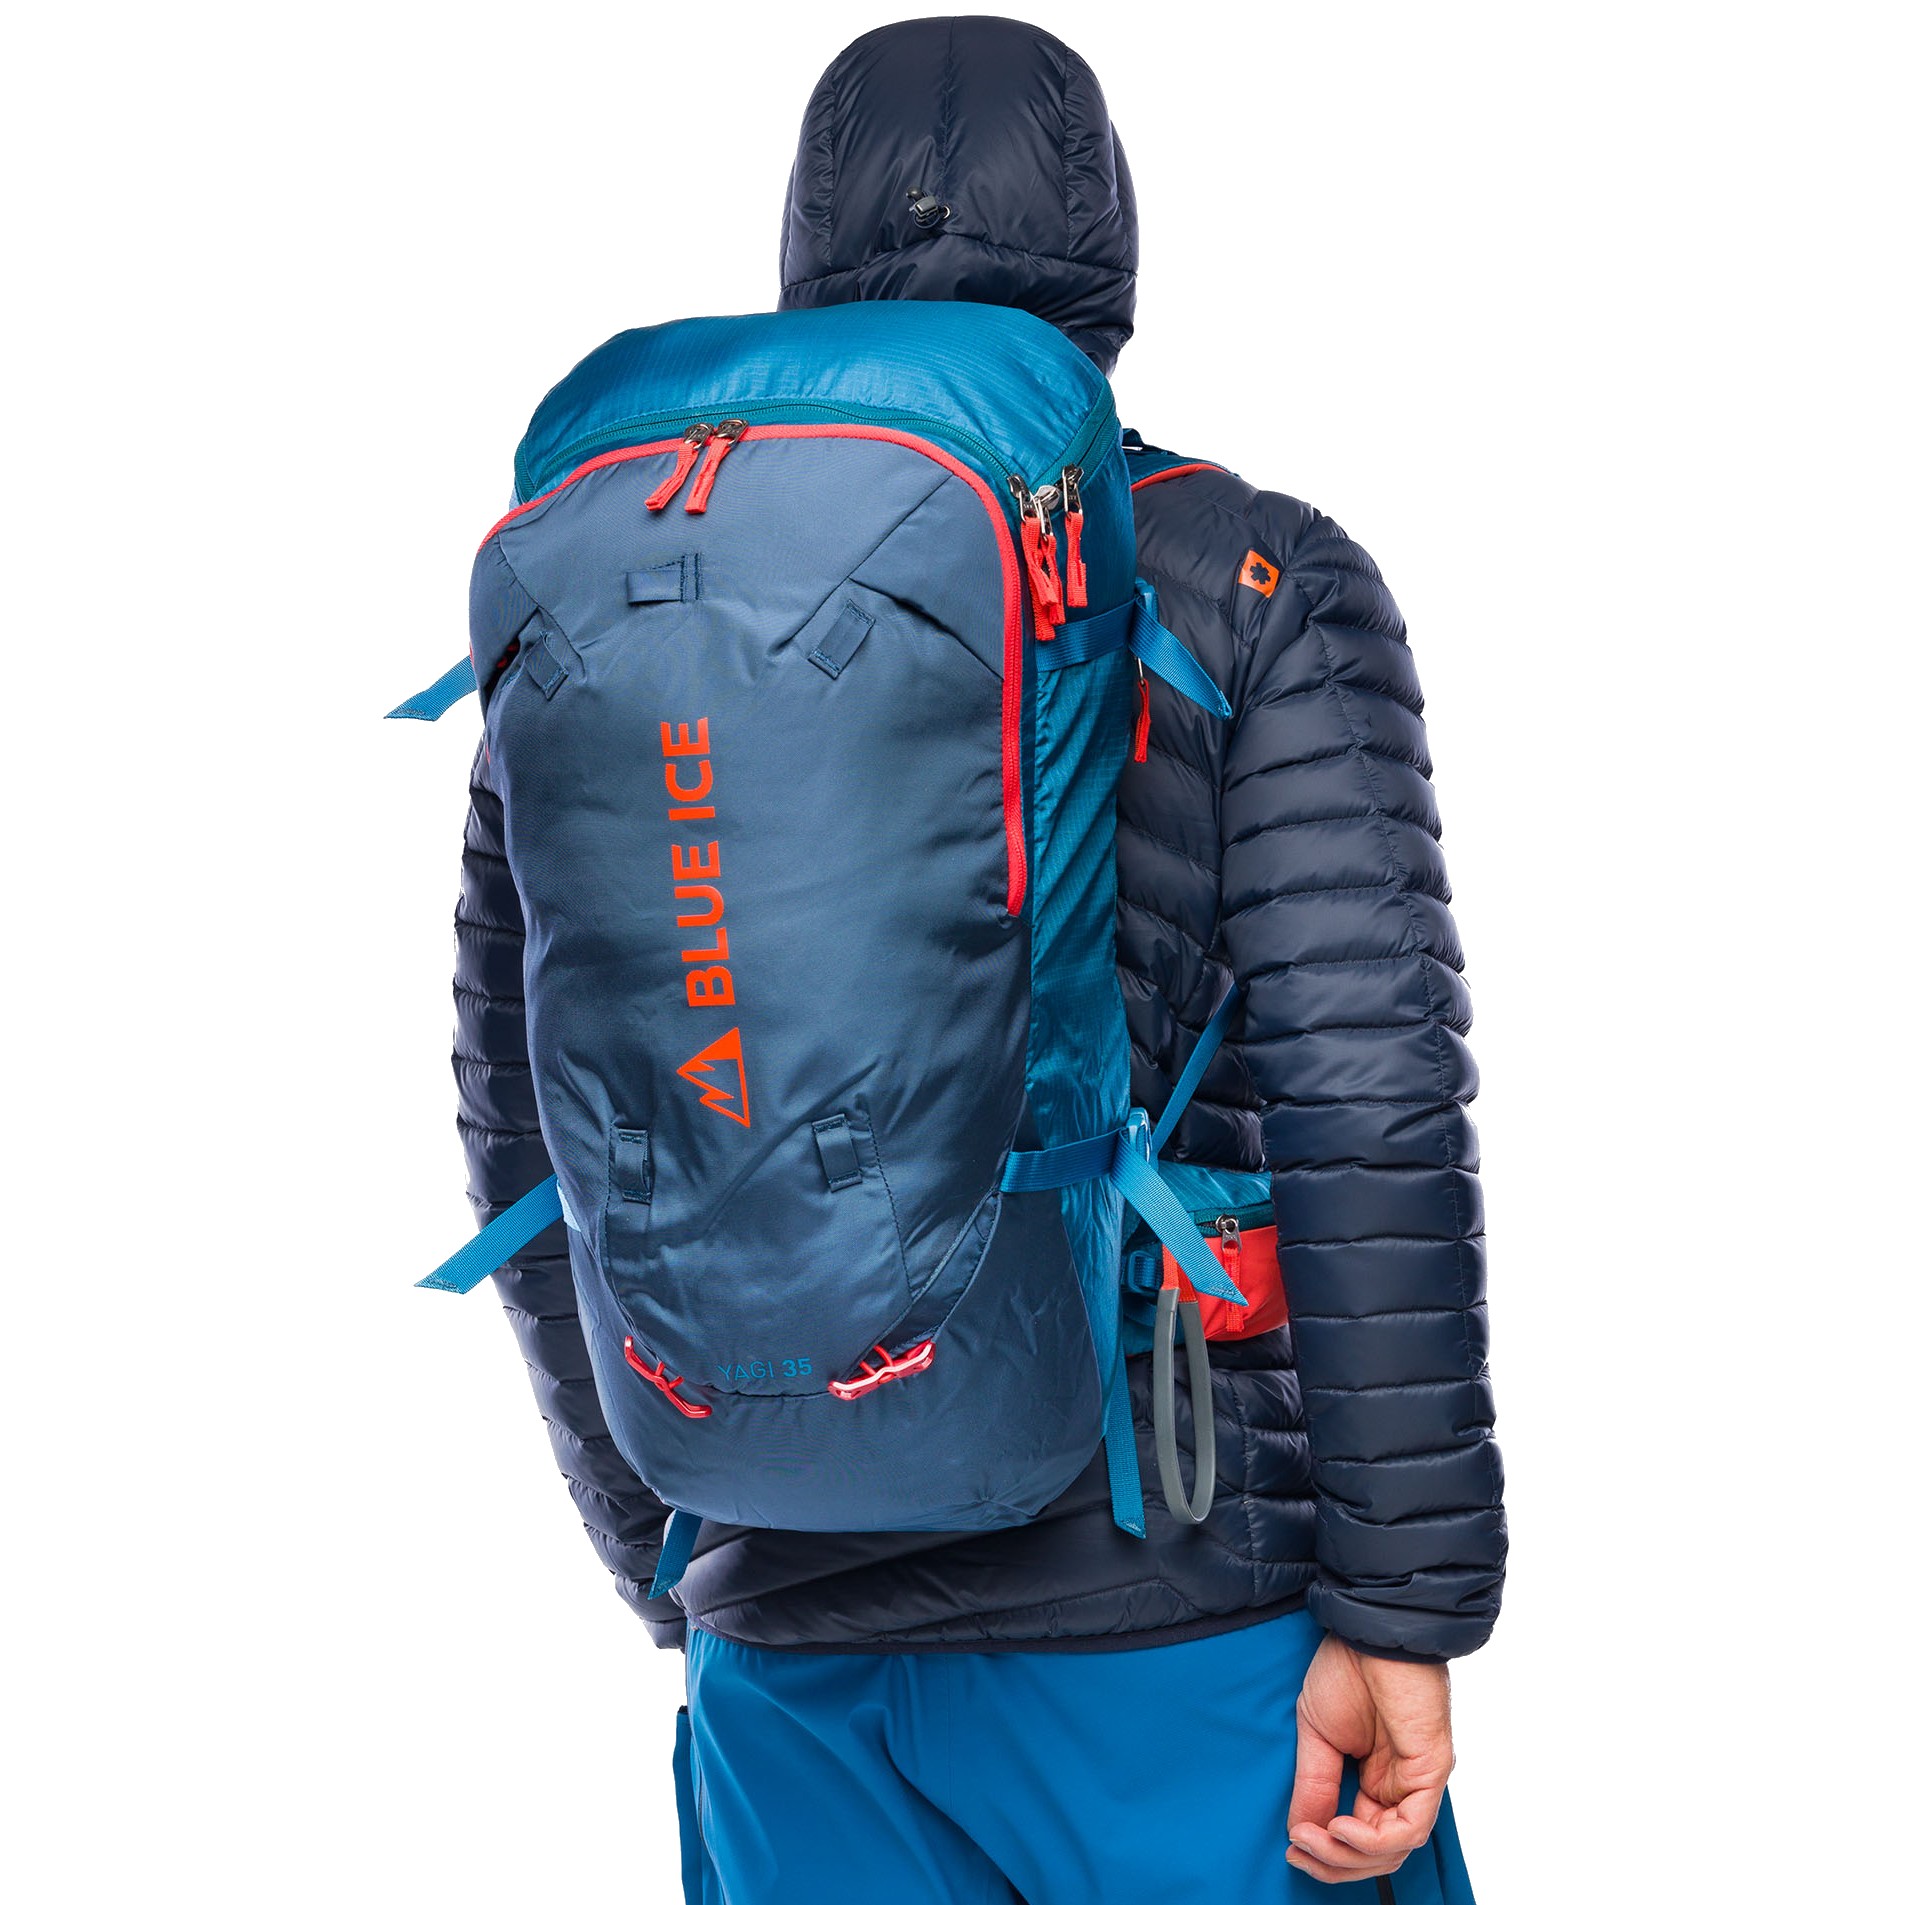 Blue Ice Yagi 35L Backpack Mountaineering Pack